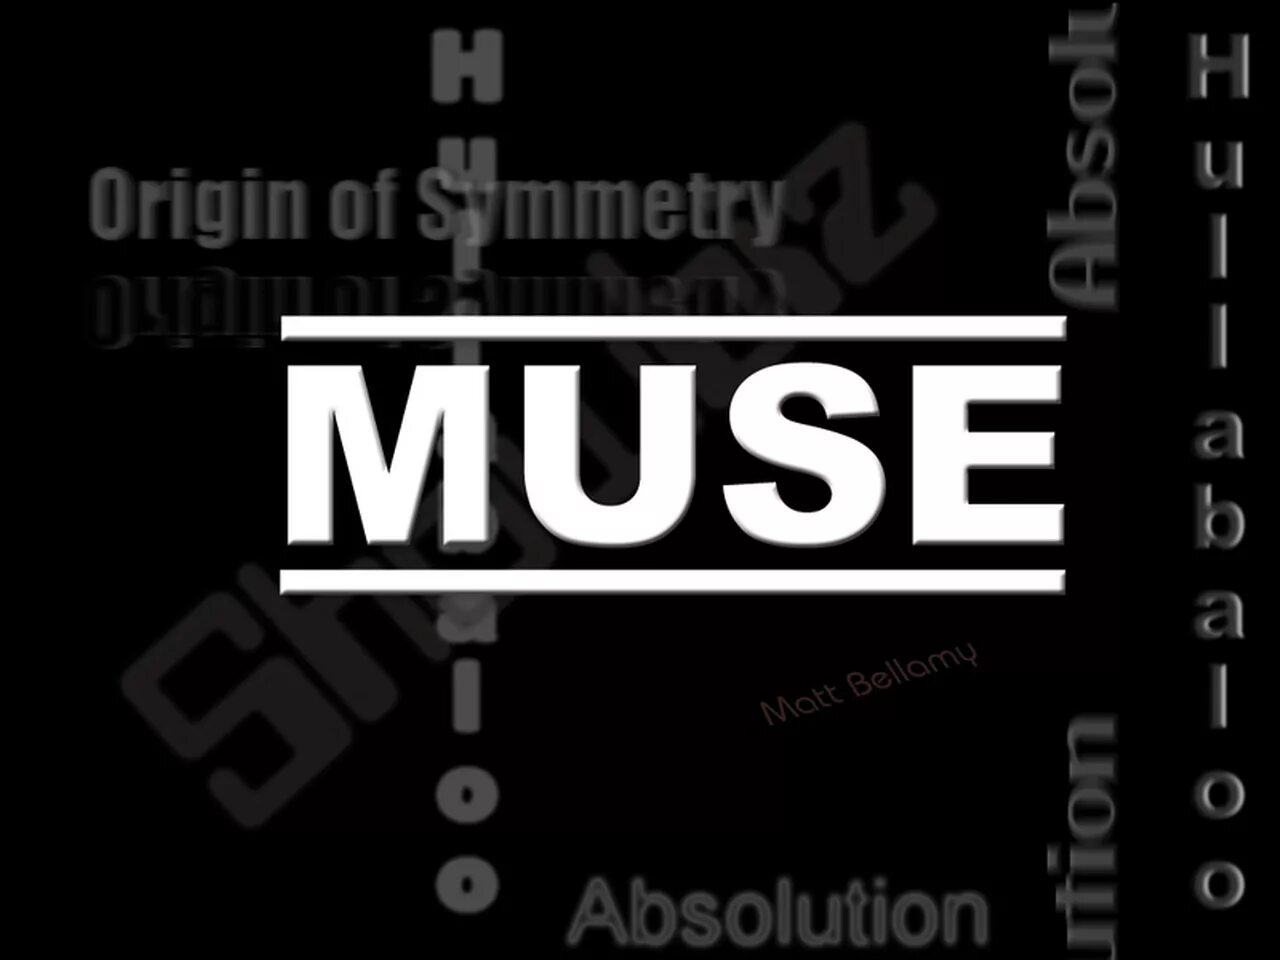 Muse undisclosed desires. Muse poster. Muse логотип. Logo Muse Absolution. Muse Survival.